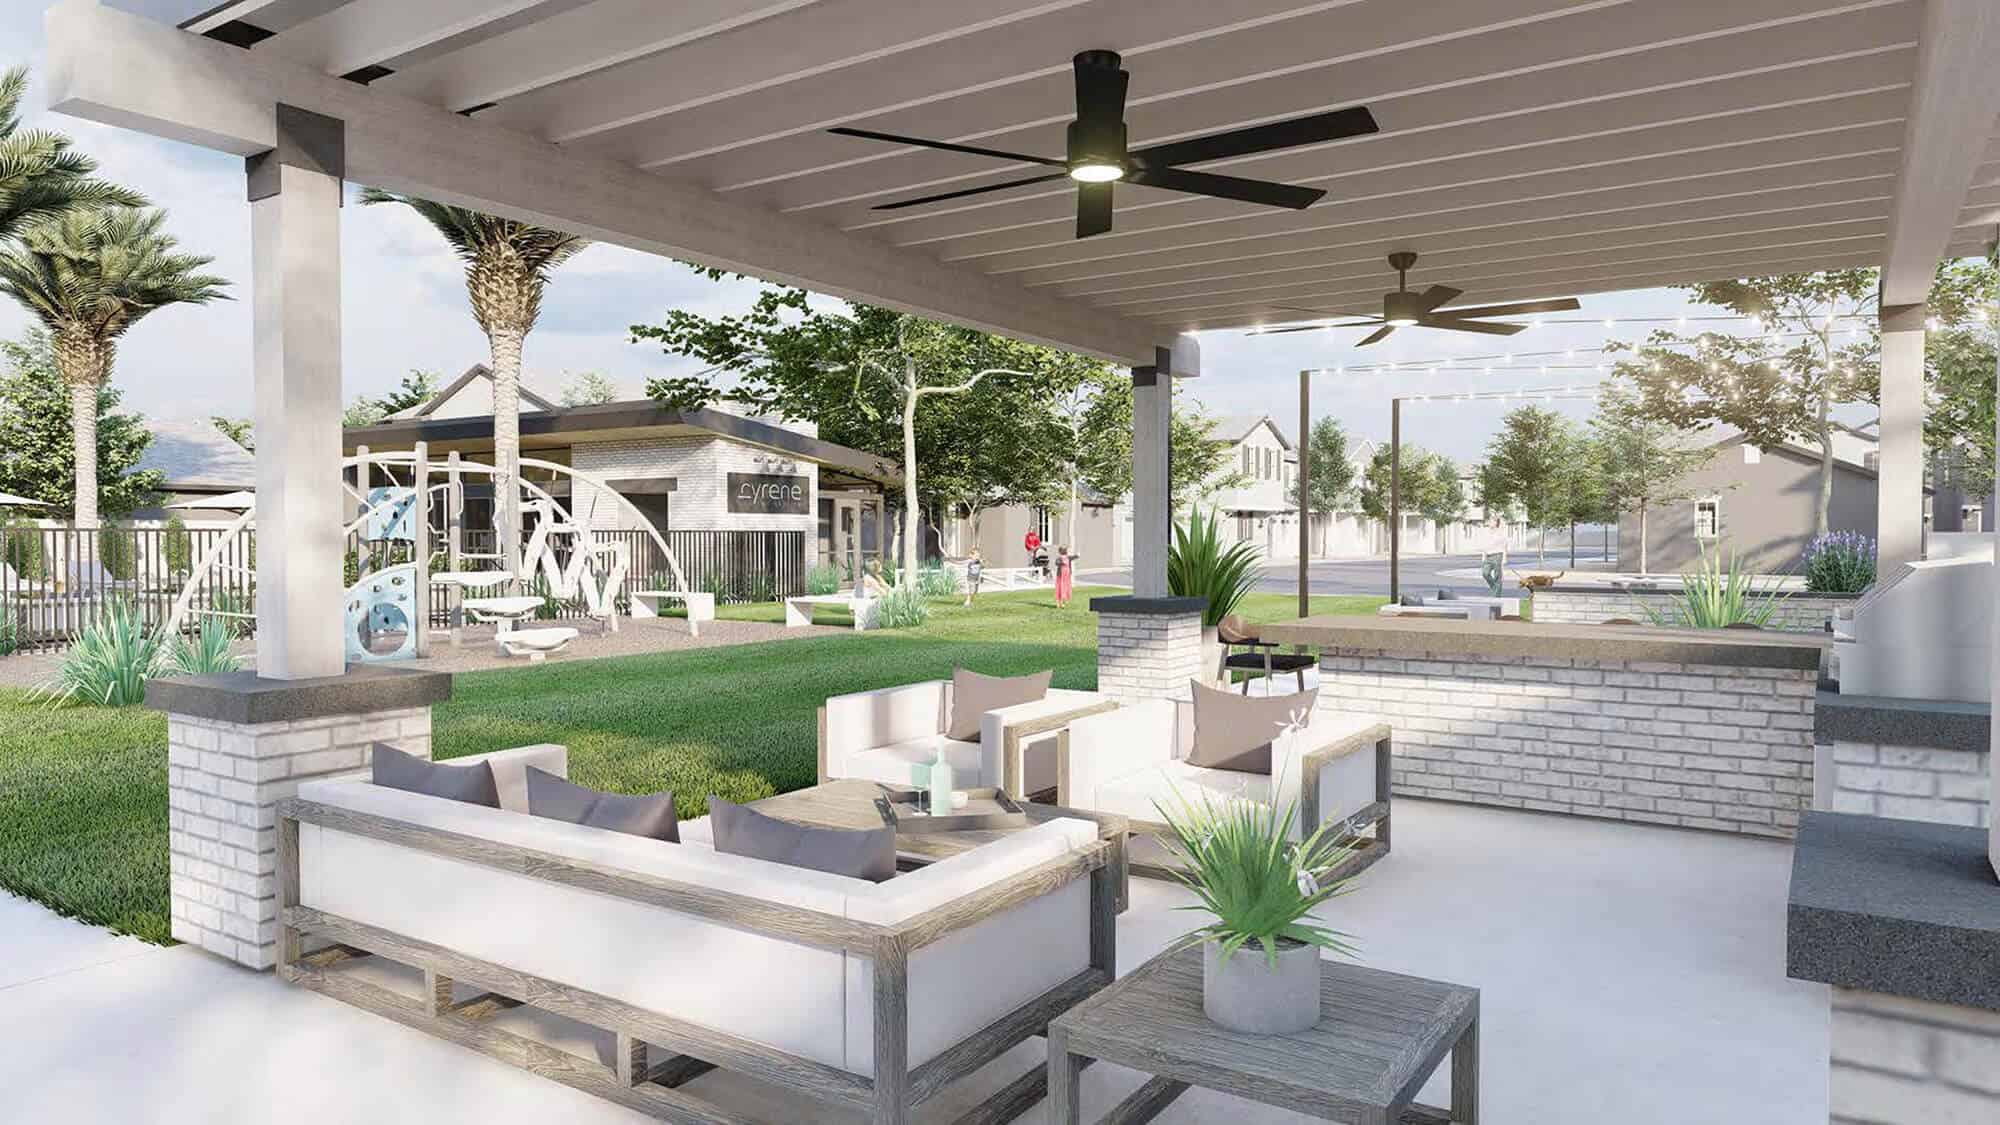 Rendering of an outdoor lounge